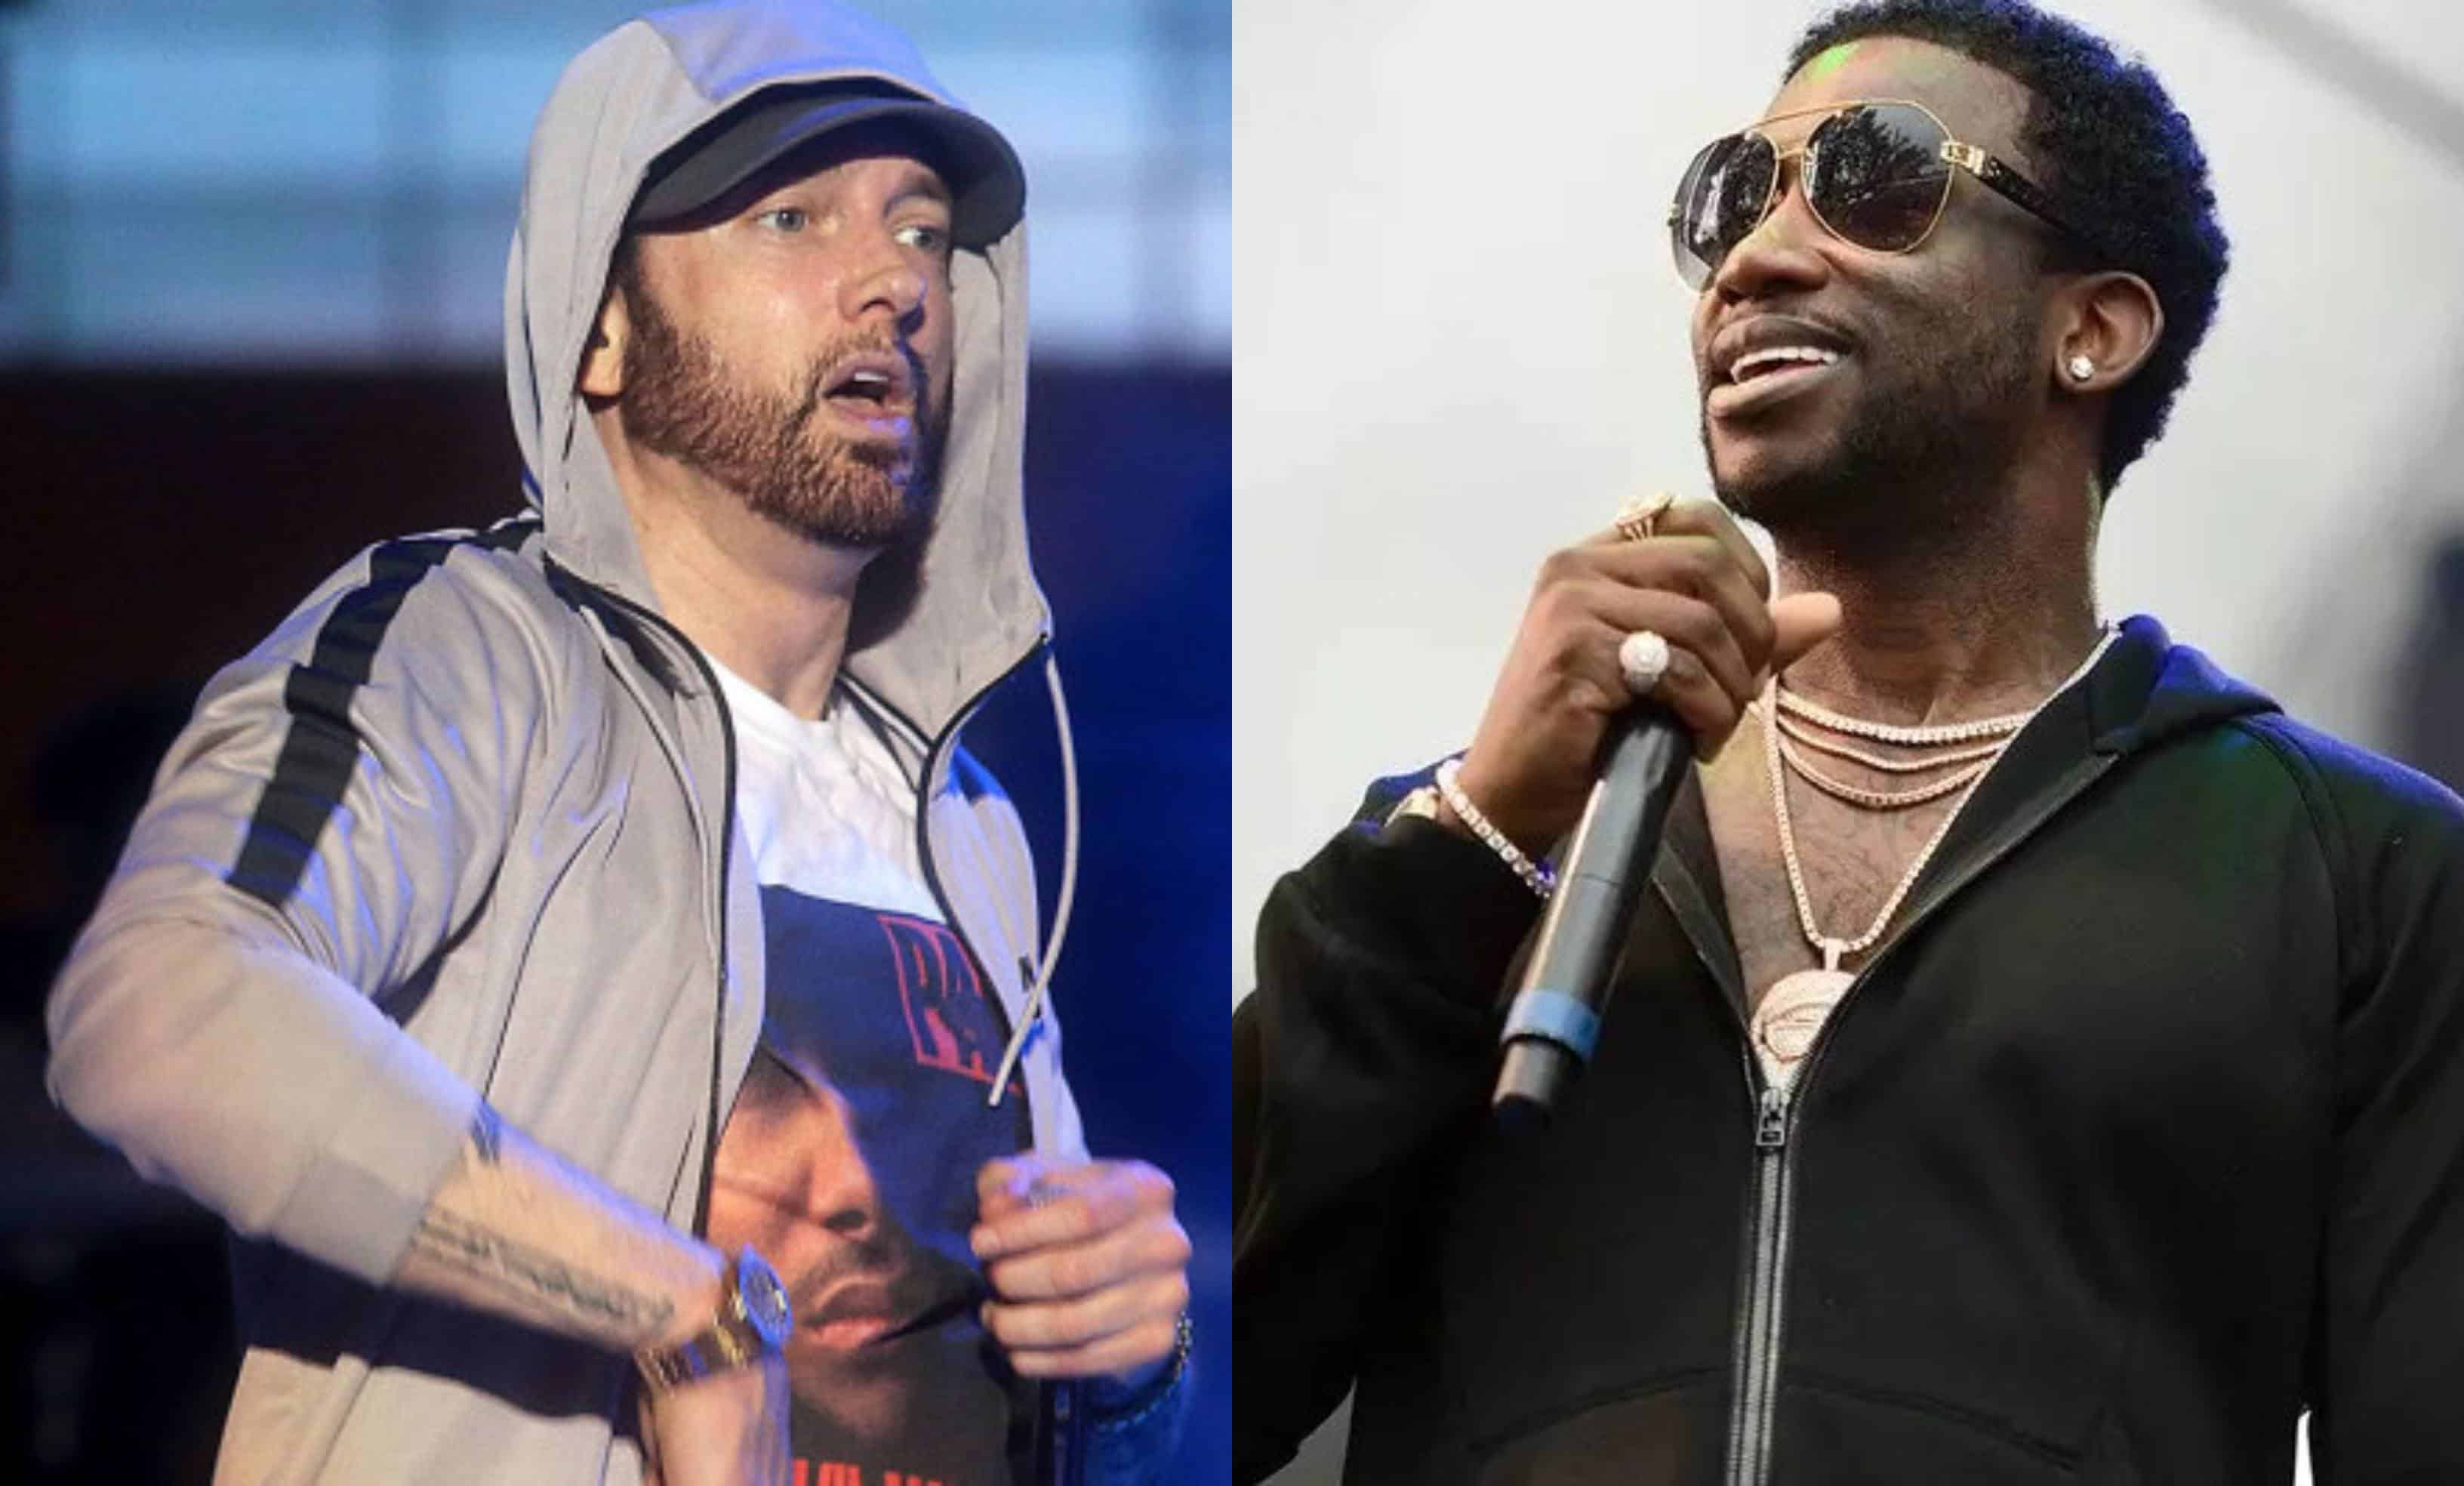 Gucci Mane on Eminem's 'King of Rap' "You Got To With A Better Name"